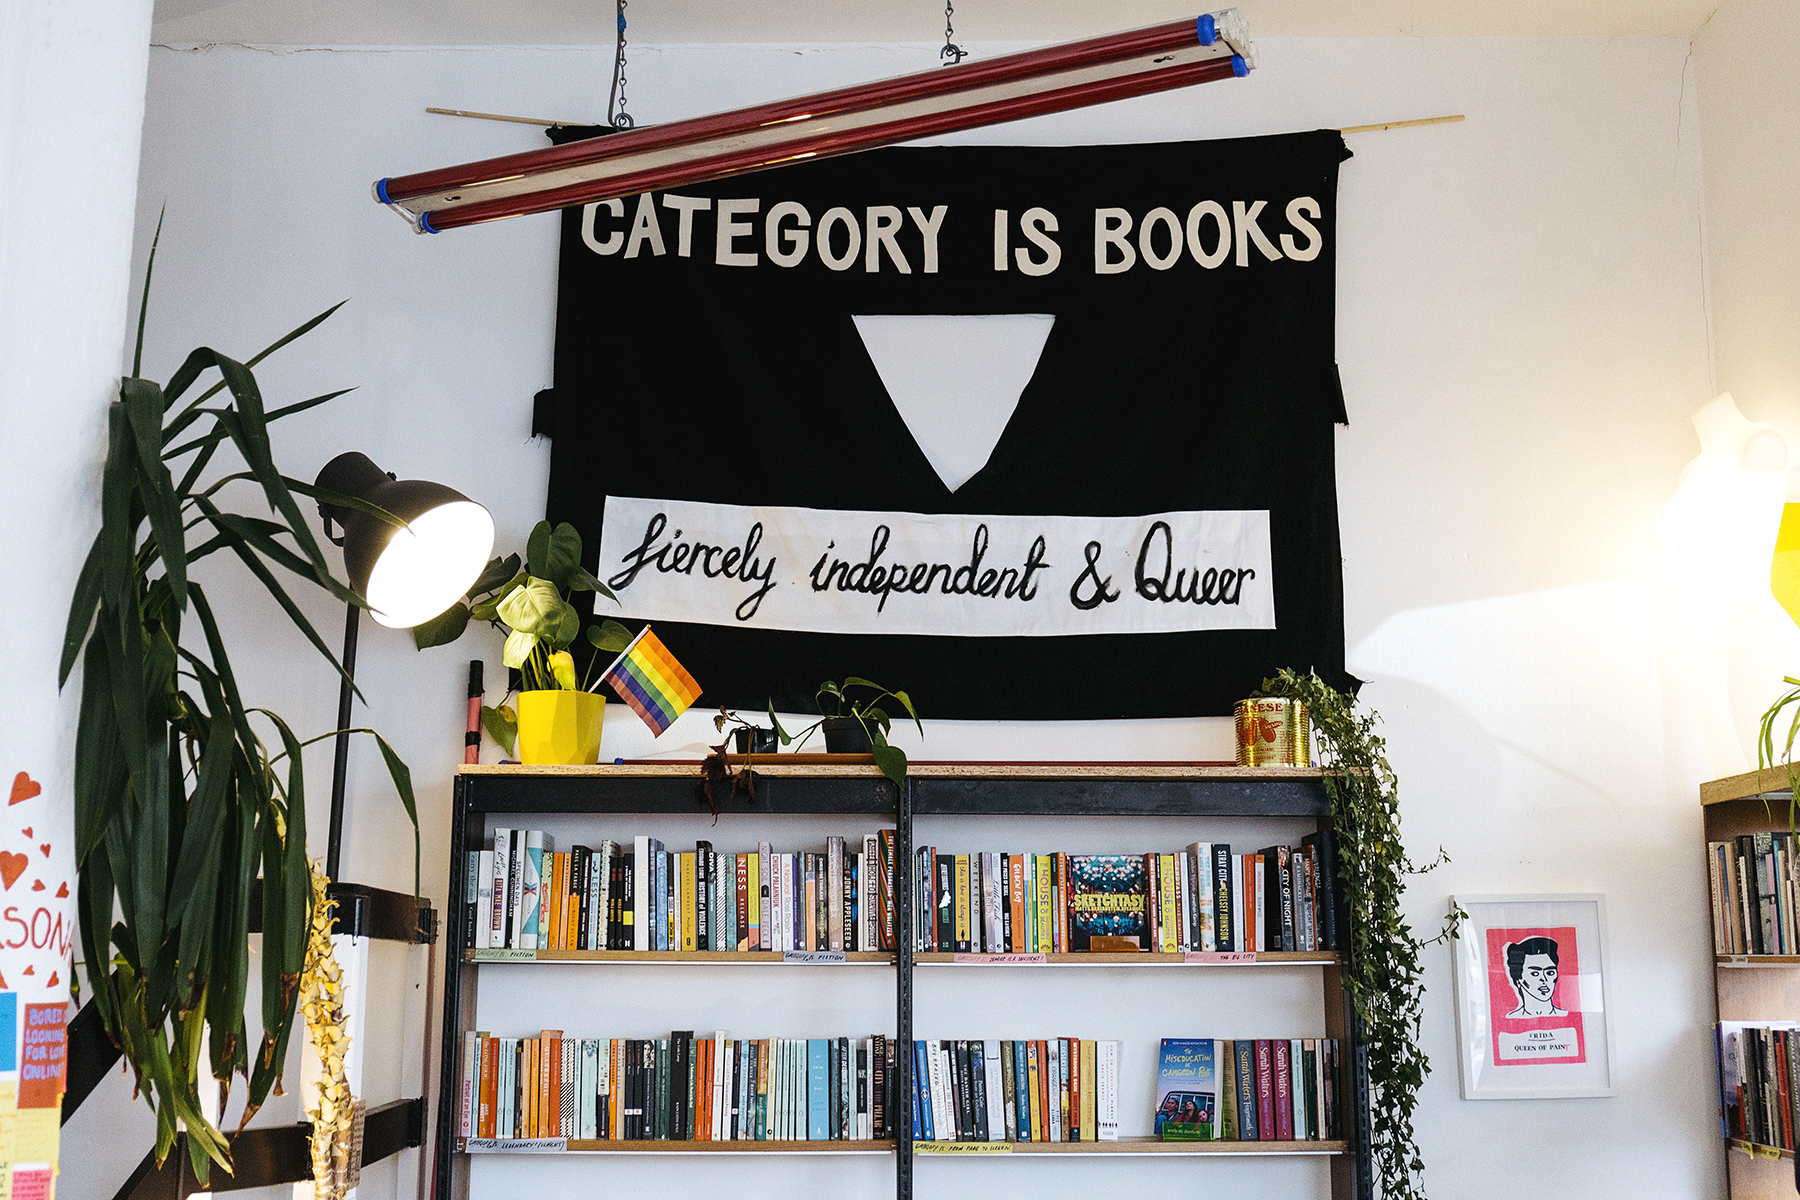 (Photo Credit: Category is Books)